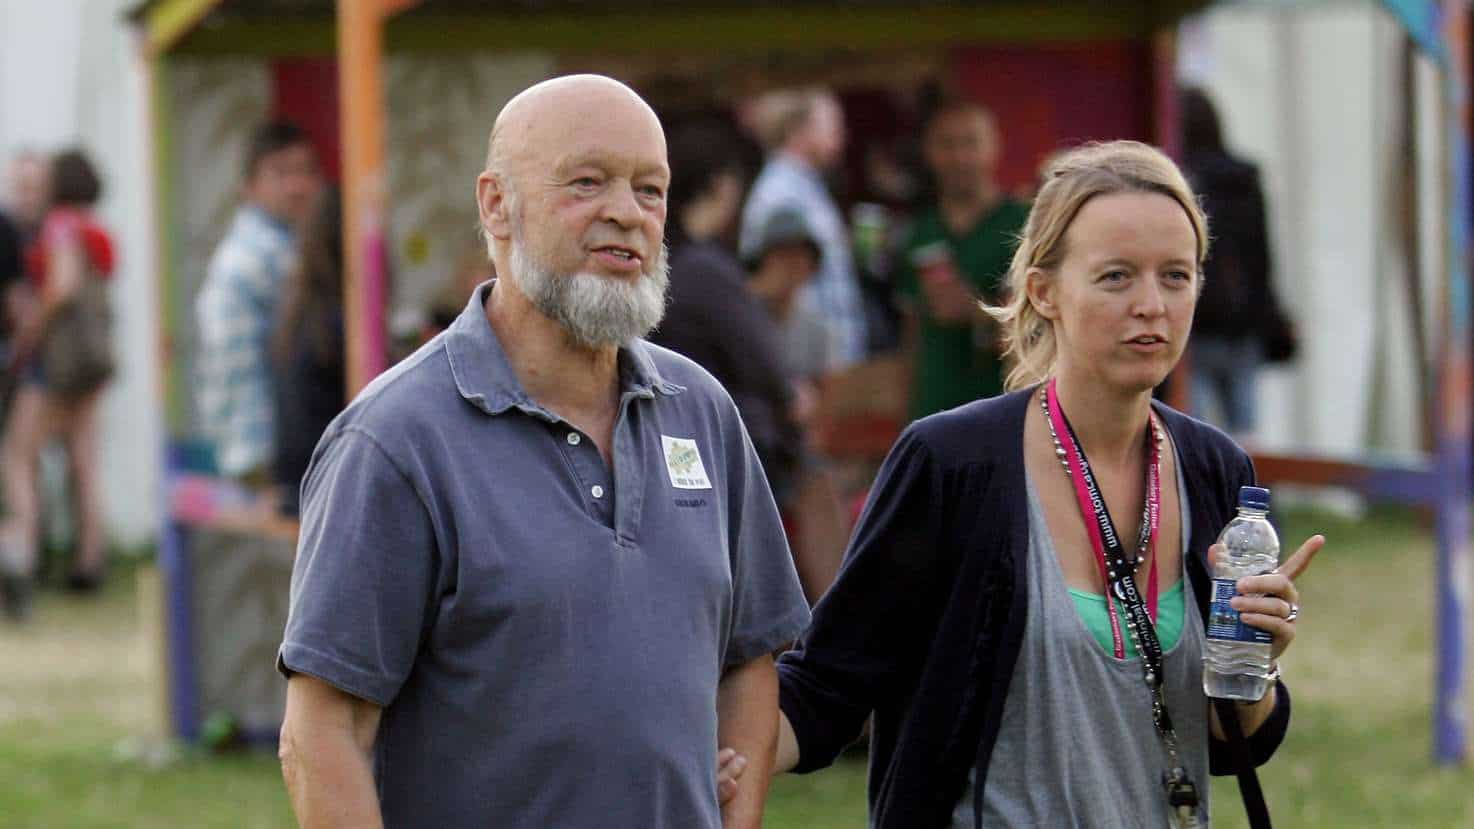 Michael Eavis and Emily Eavis at the Glastonbury Festival (Credits: Daily Mail)